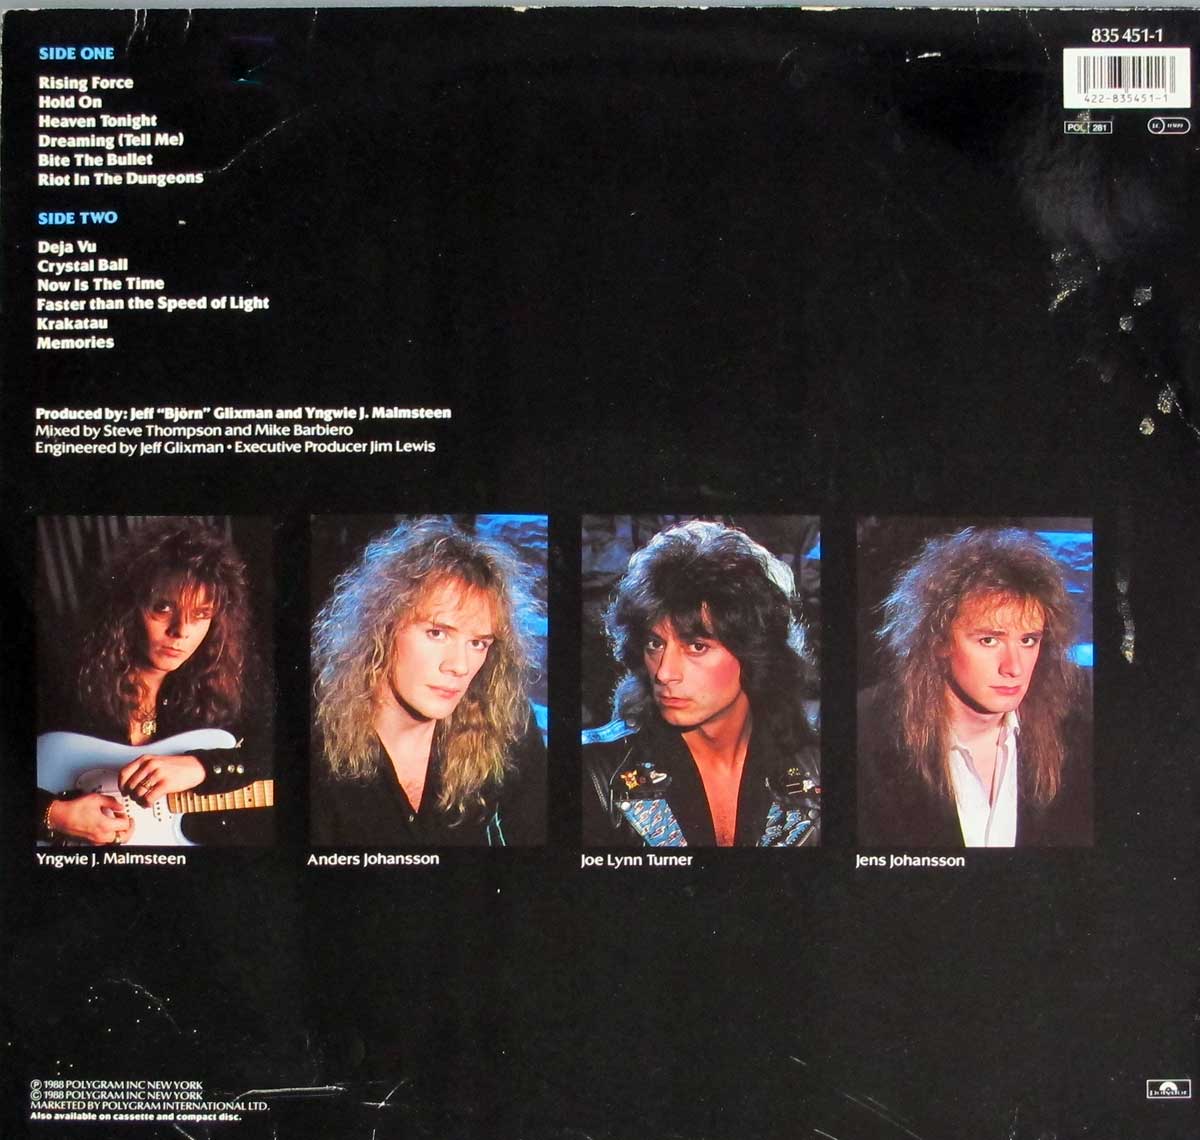 Album Back Cover  Photo of "YNGWIE J. MALMSTEEN RISING FORCE - Odyssey"